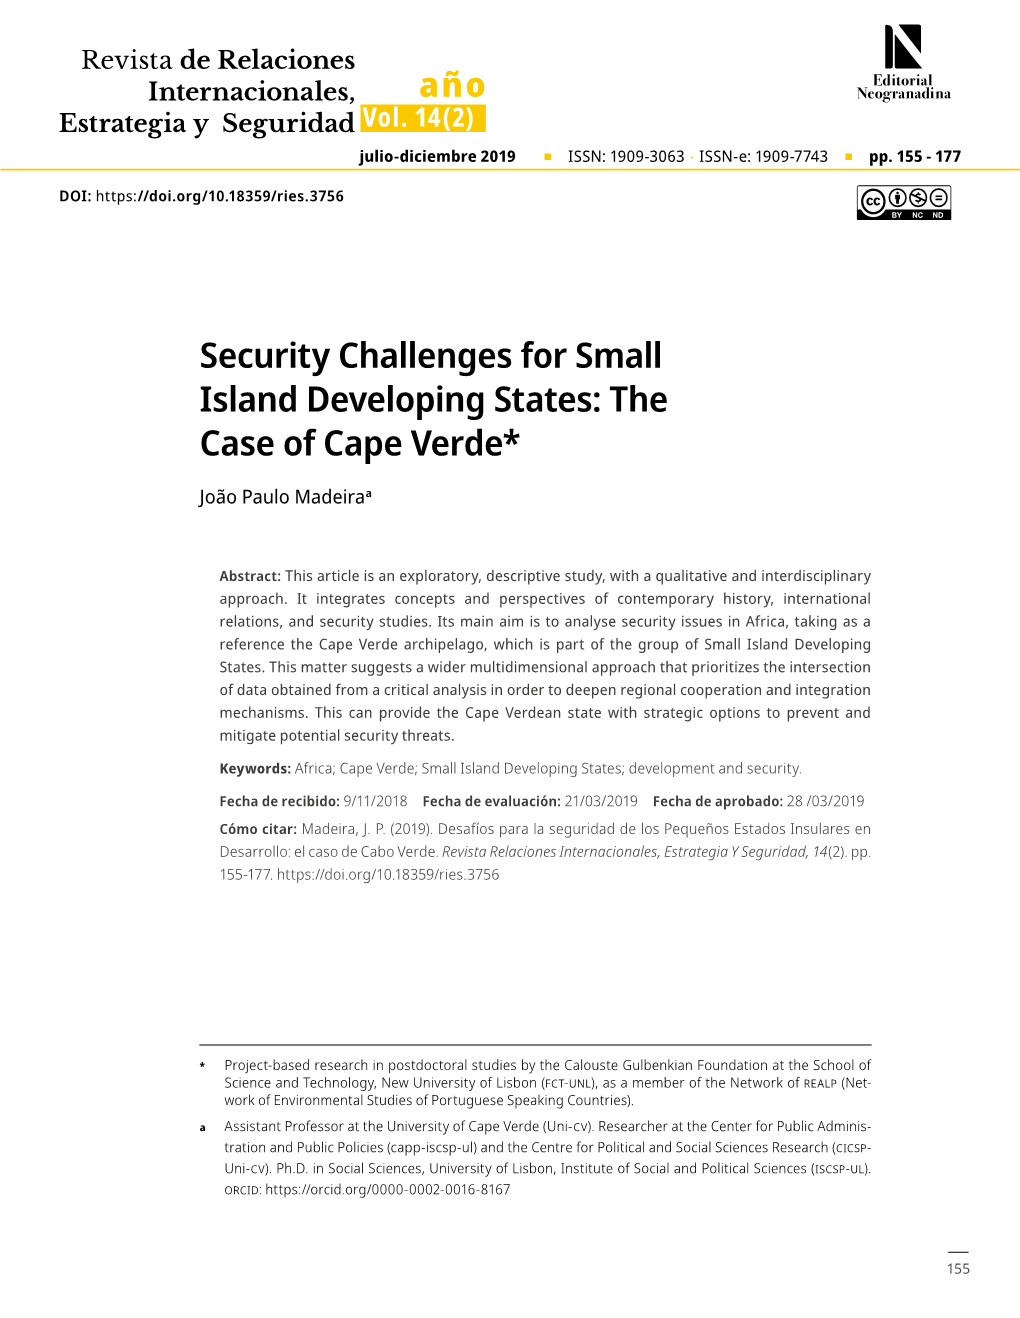 Security Challenges for Small Island Developing States: the Case of Cape Verde*